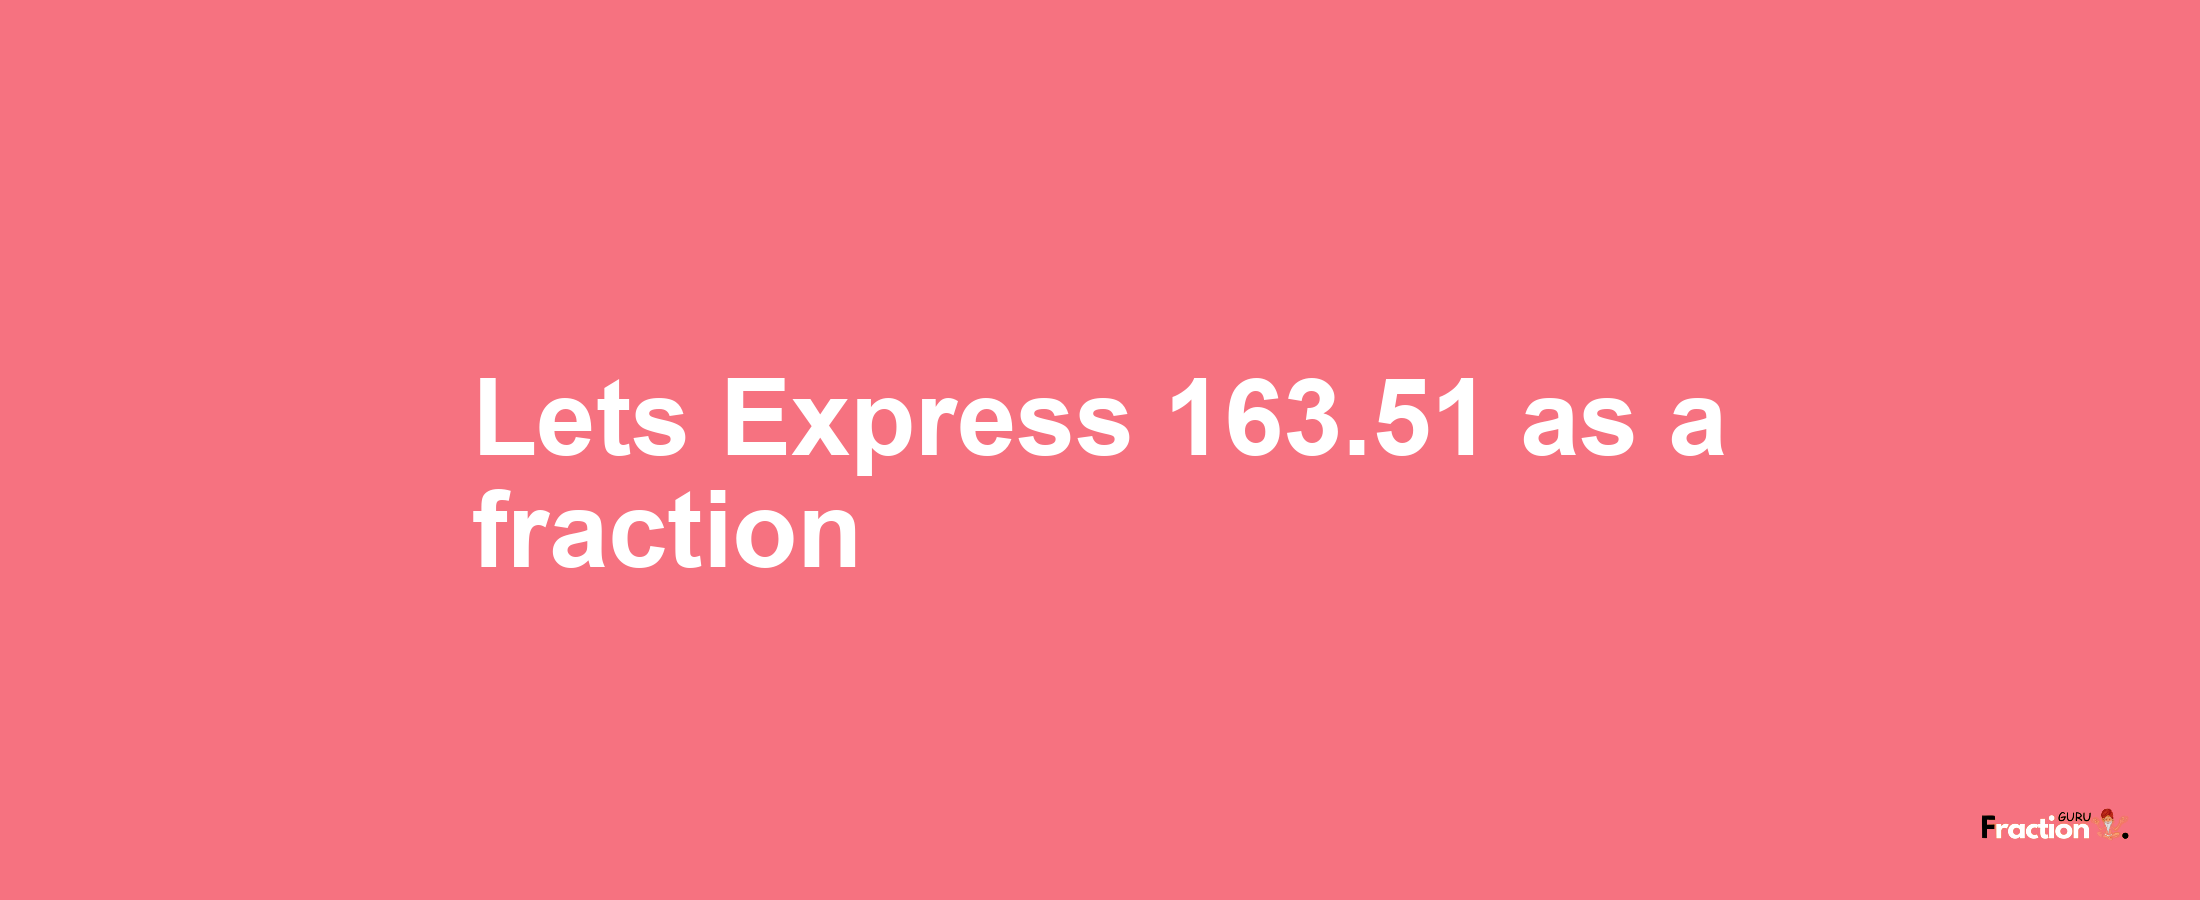 Lets Express 163.51 as afraction